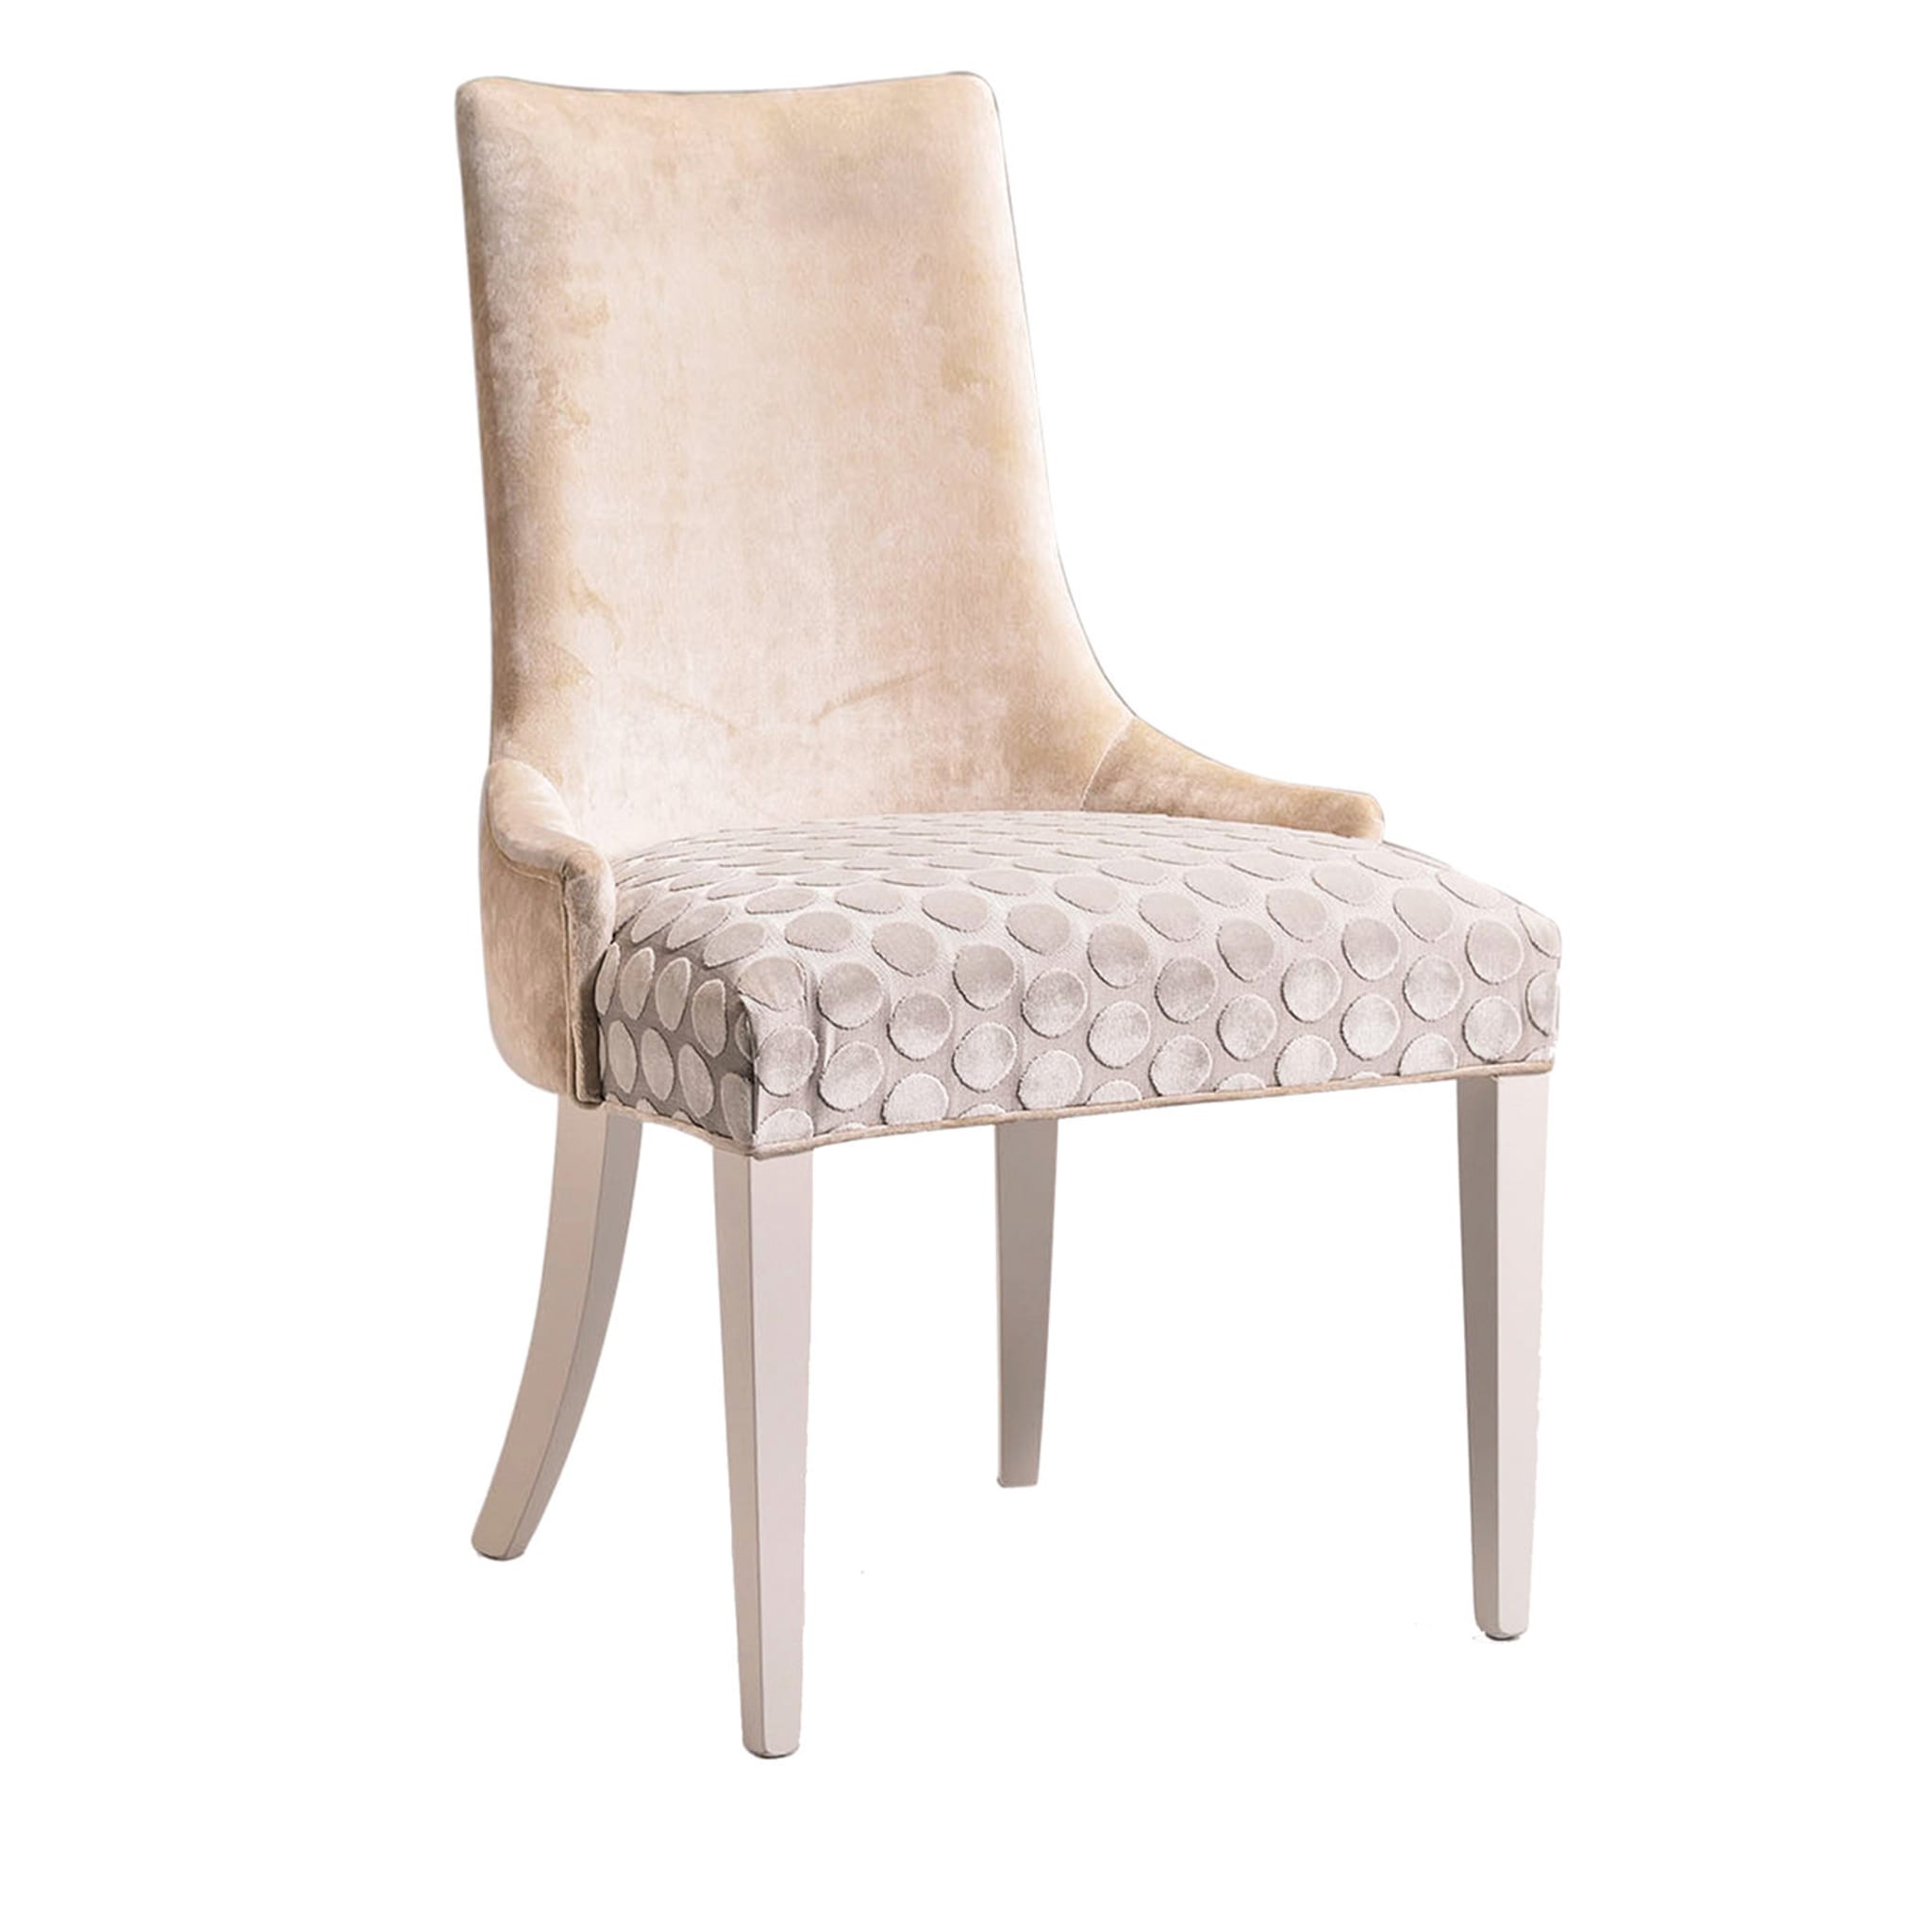 Set of 2 Beige And White Armchairs - Main view